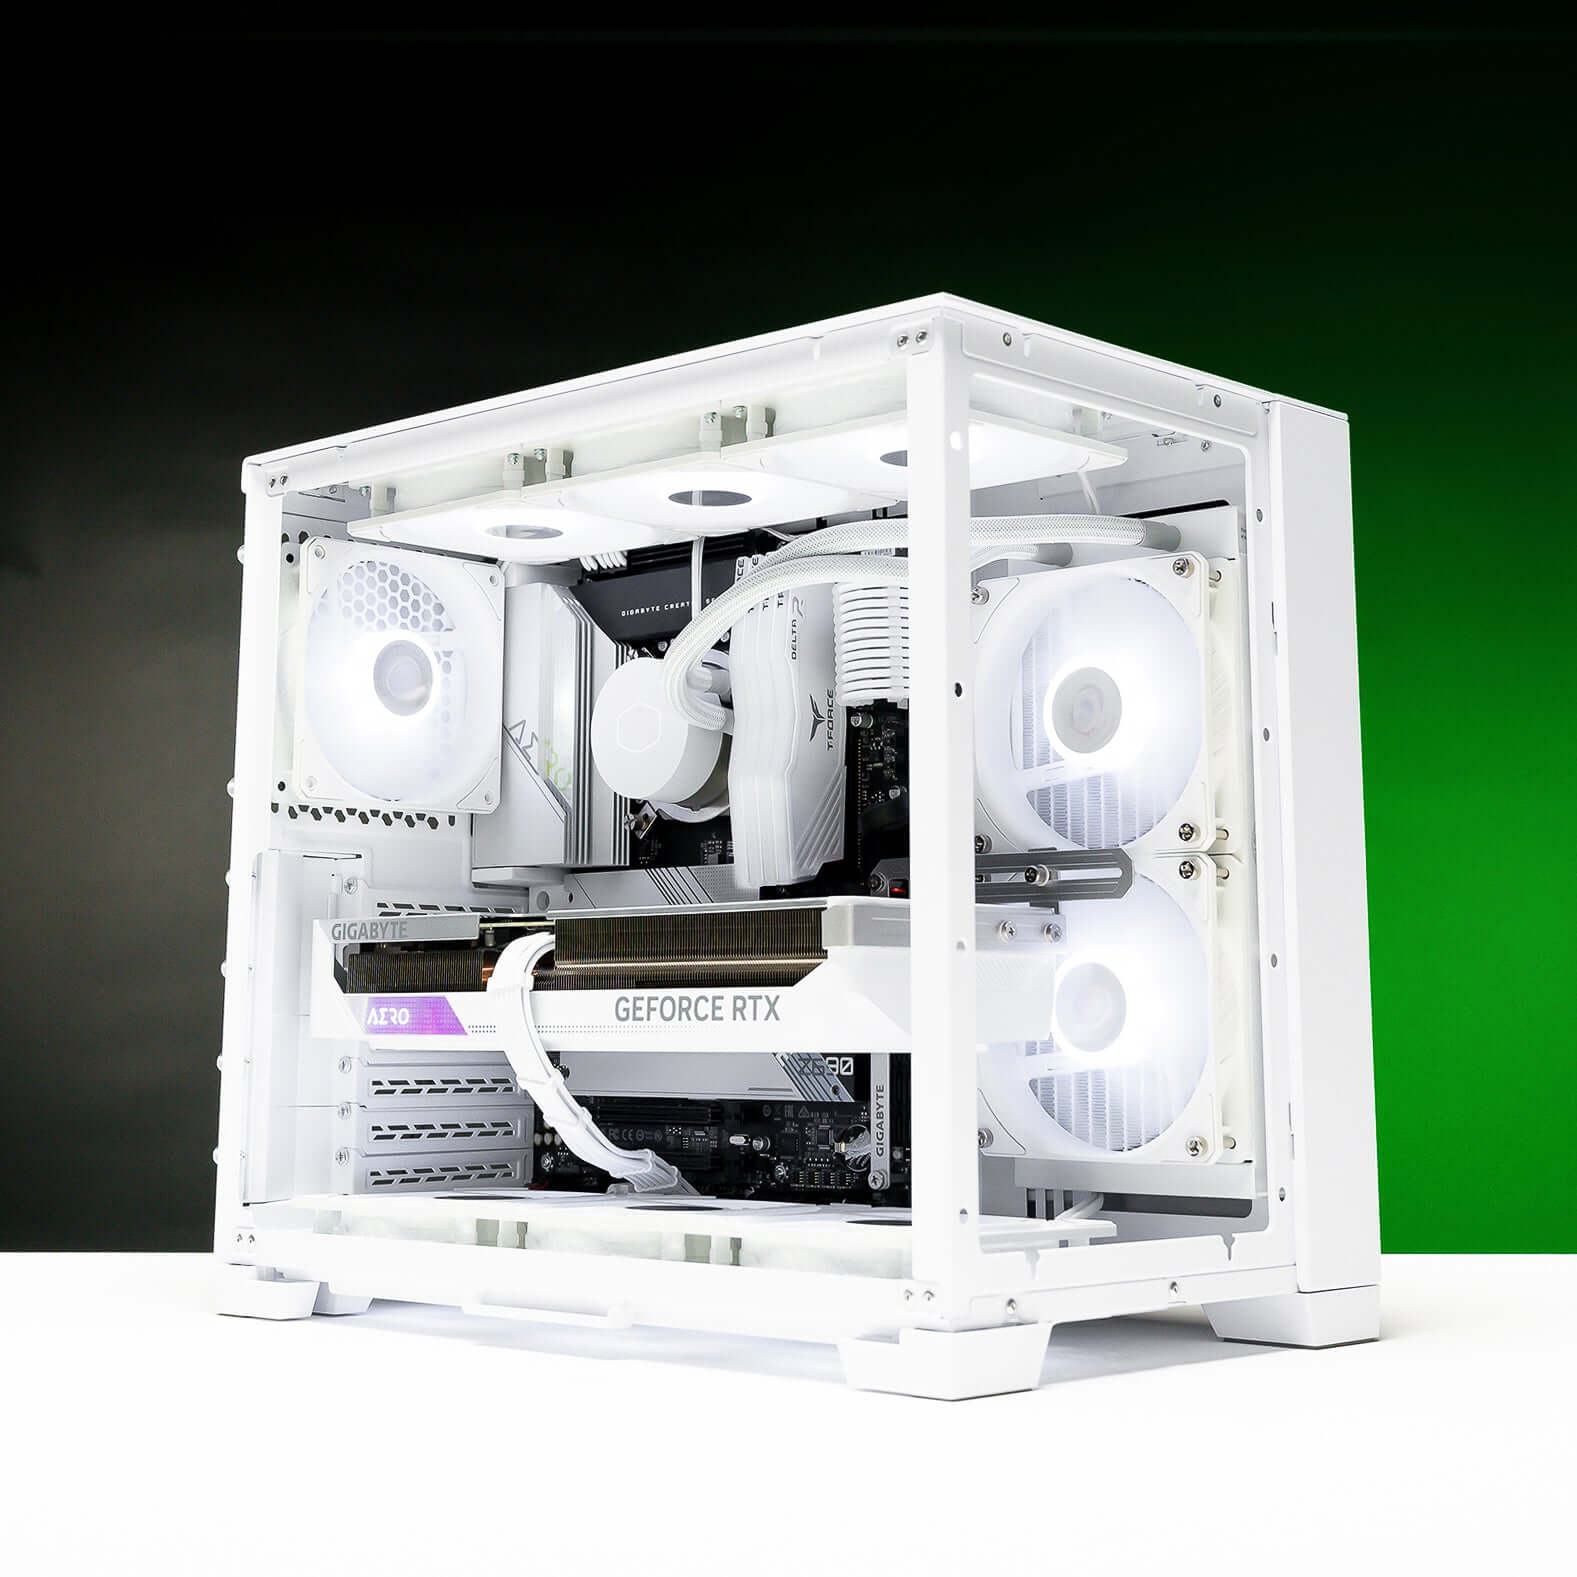 Collection of Snow gaming PCs with clean and elegant designs for a sleek gaming experience